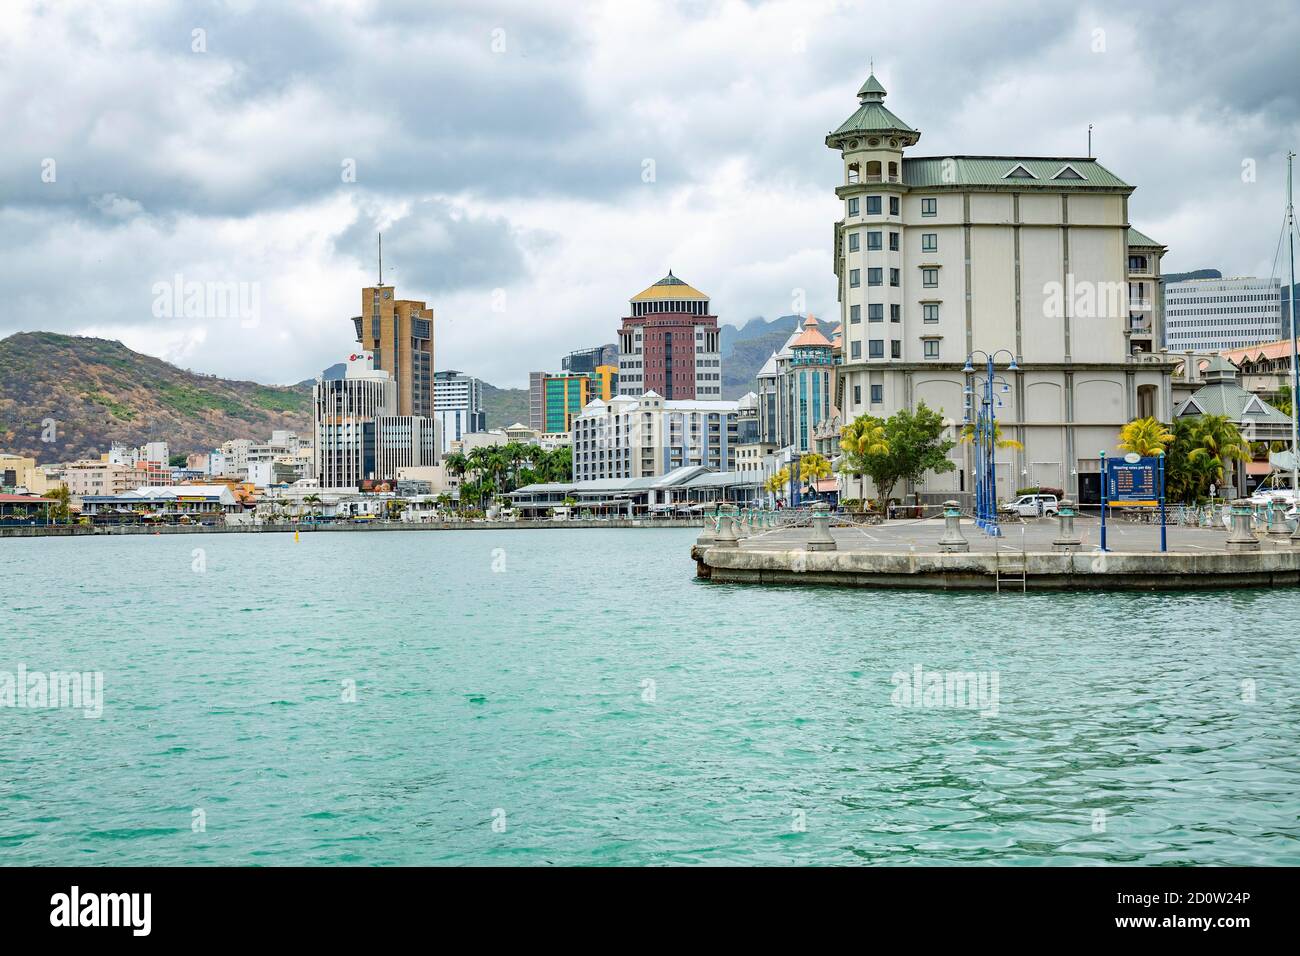 View of the town of coastal city of Portlouis, Mauritius, Africa Stock Photo